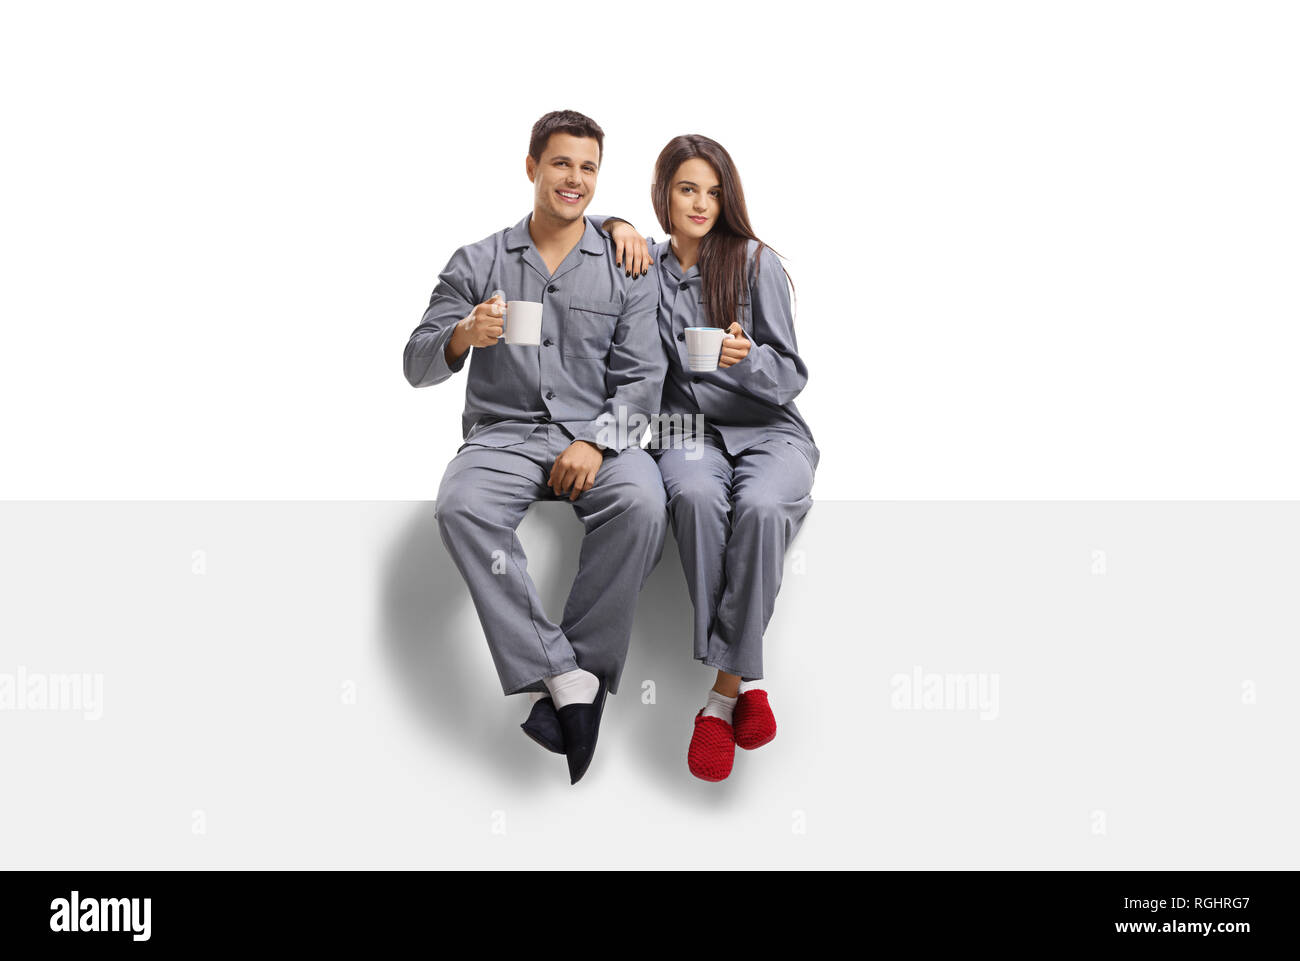 Full length portrait of a young male and female in pyjamas and sleepers sitting on a white panel and holding coffee mugs isolated on white background Stock Photo